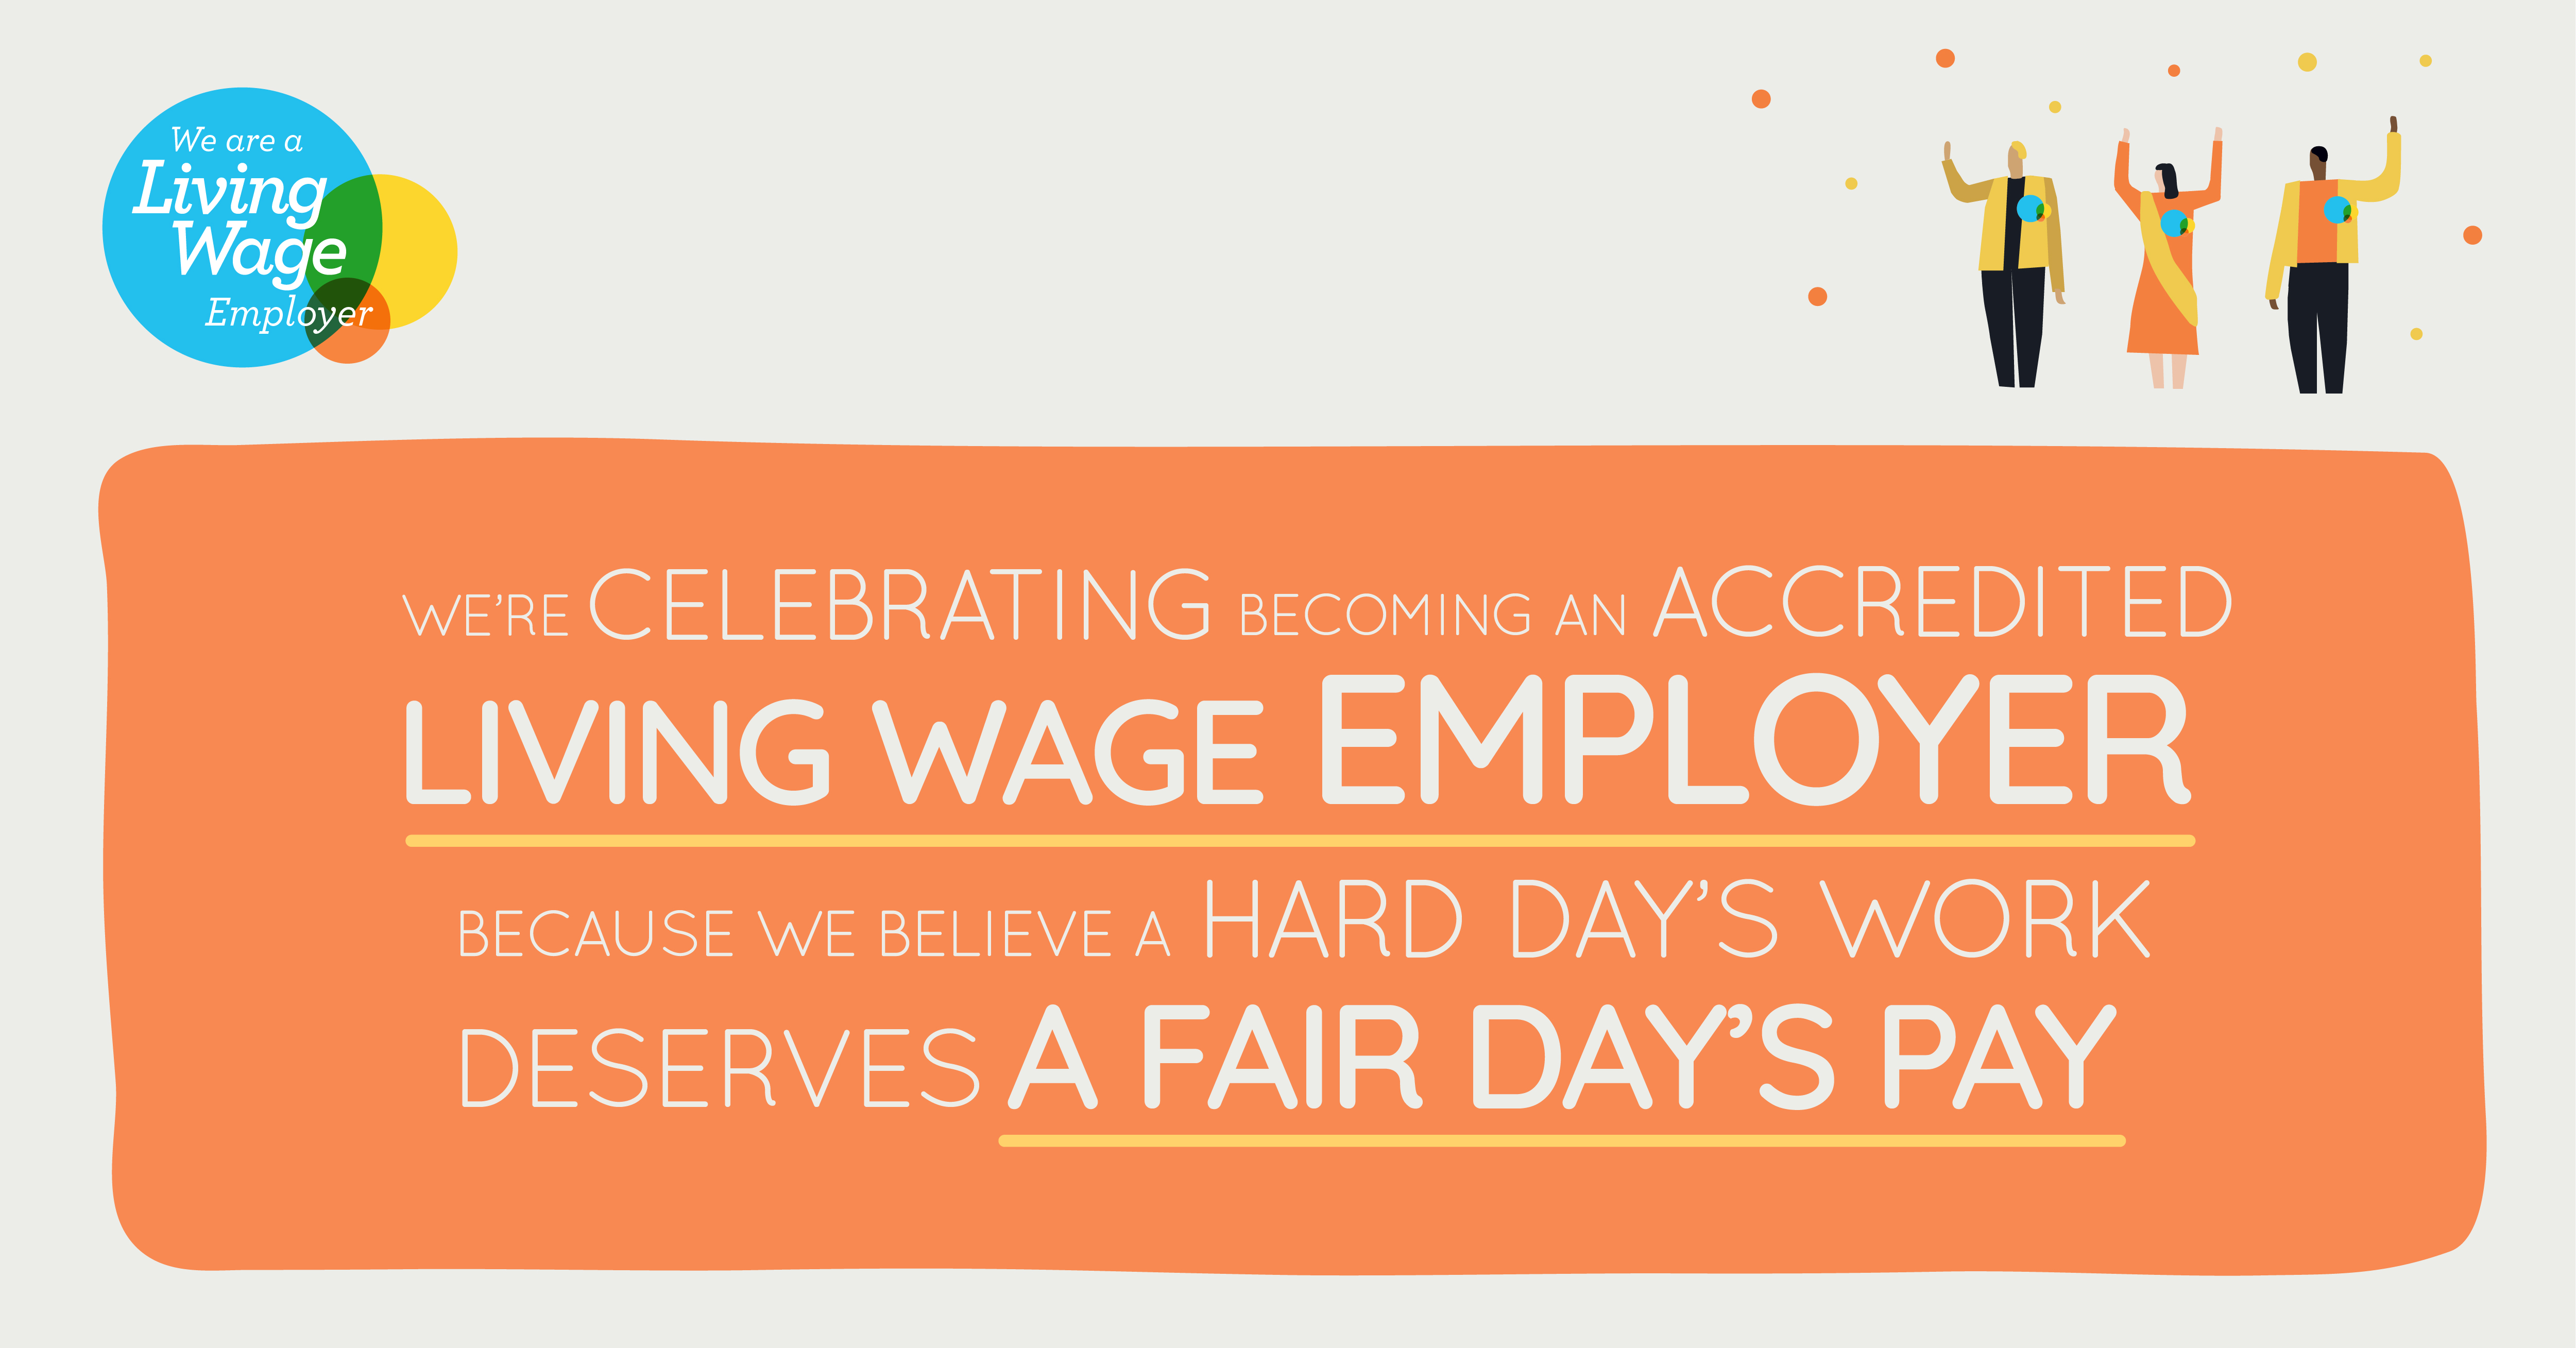 We're celebrating becoming an accredited living wage employer because we believe a hard day's work deserves a fair day's pay.